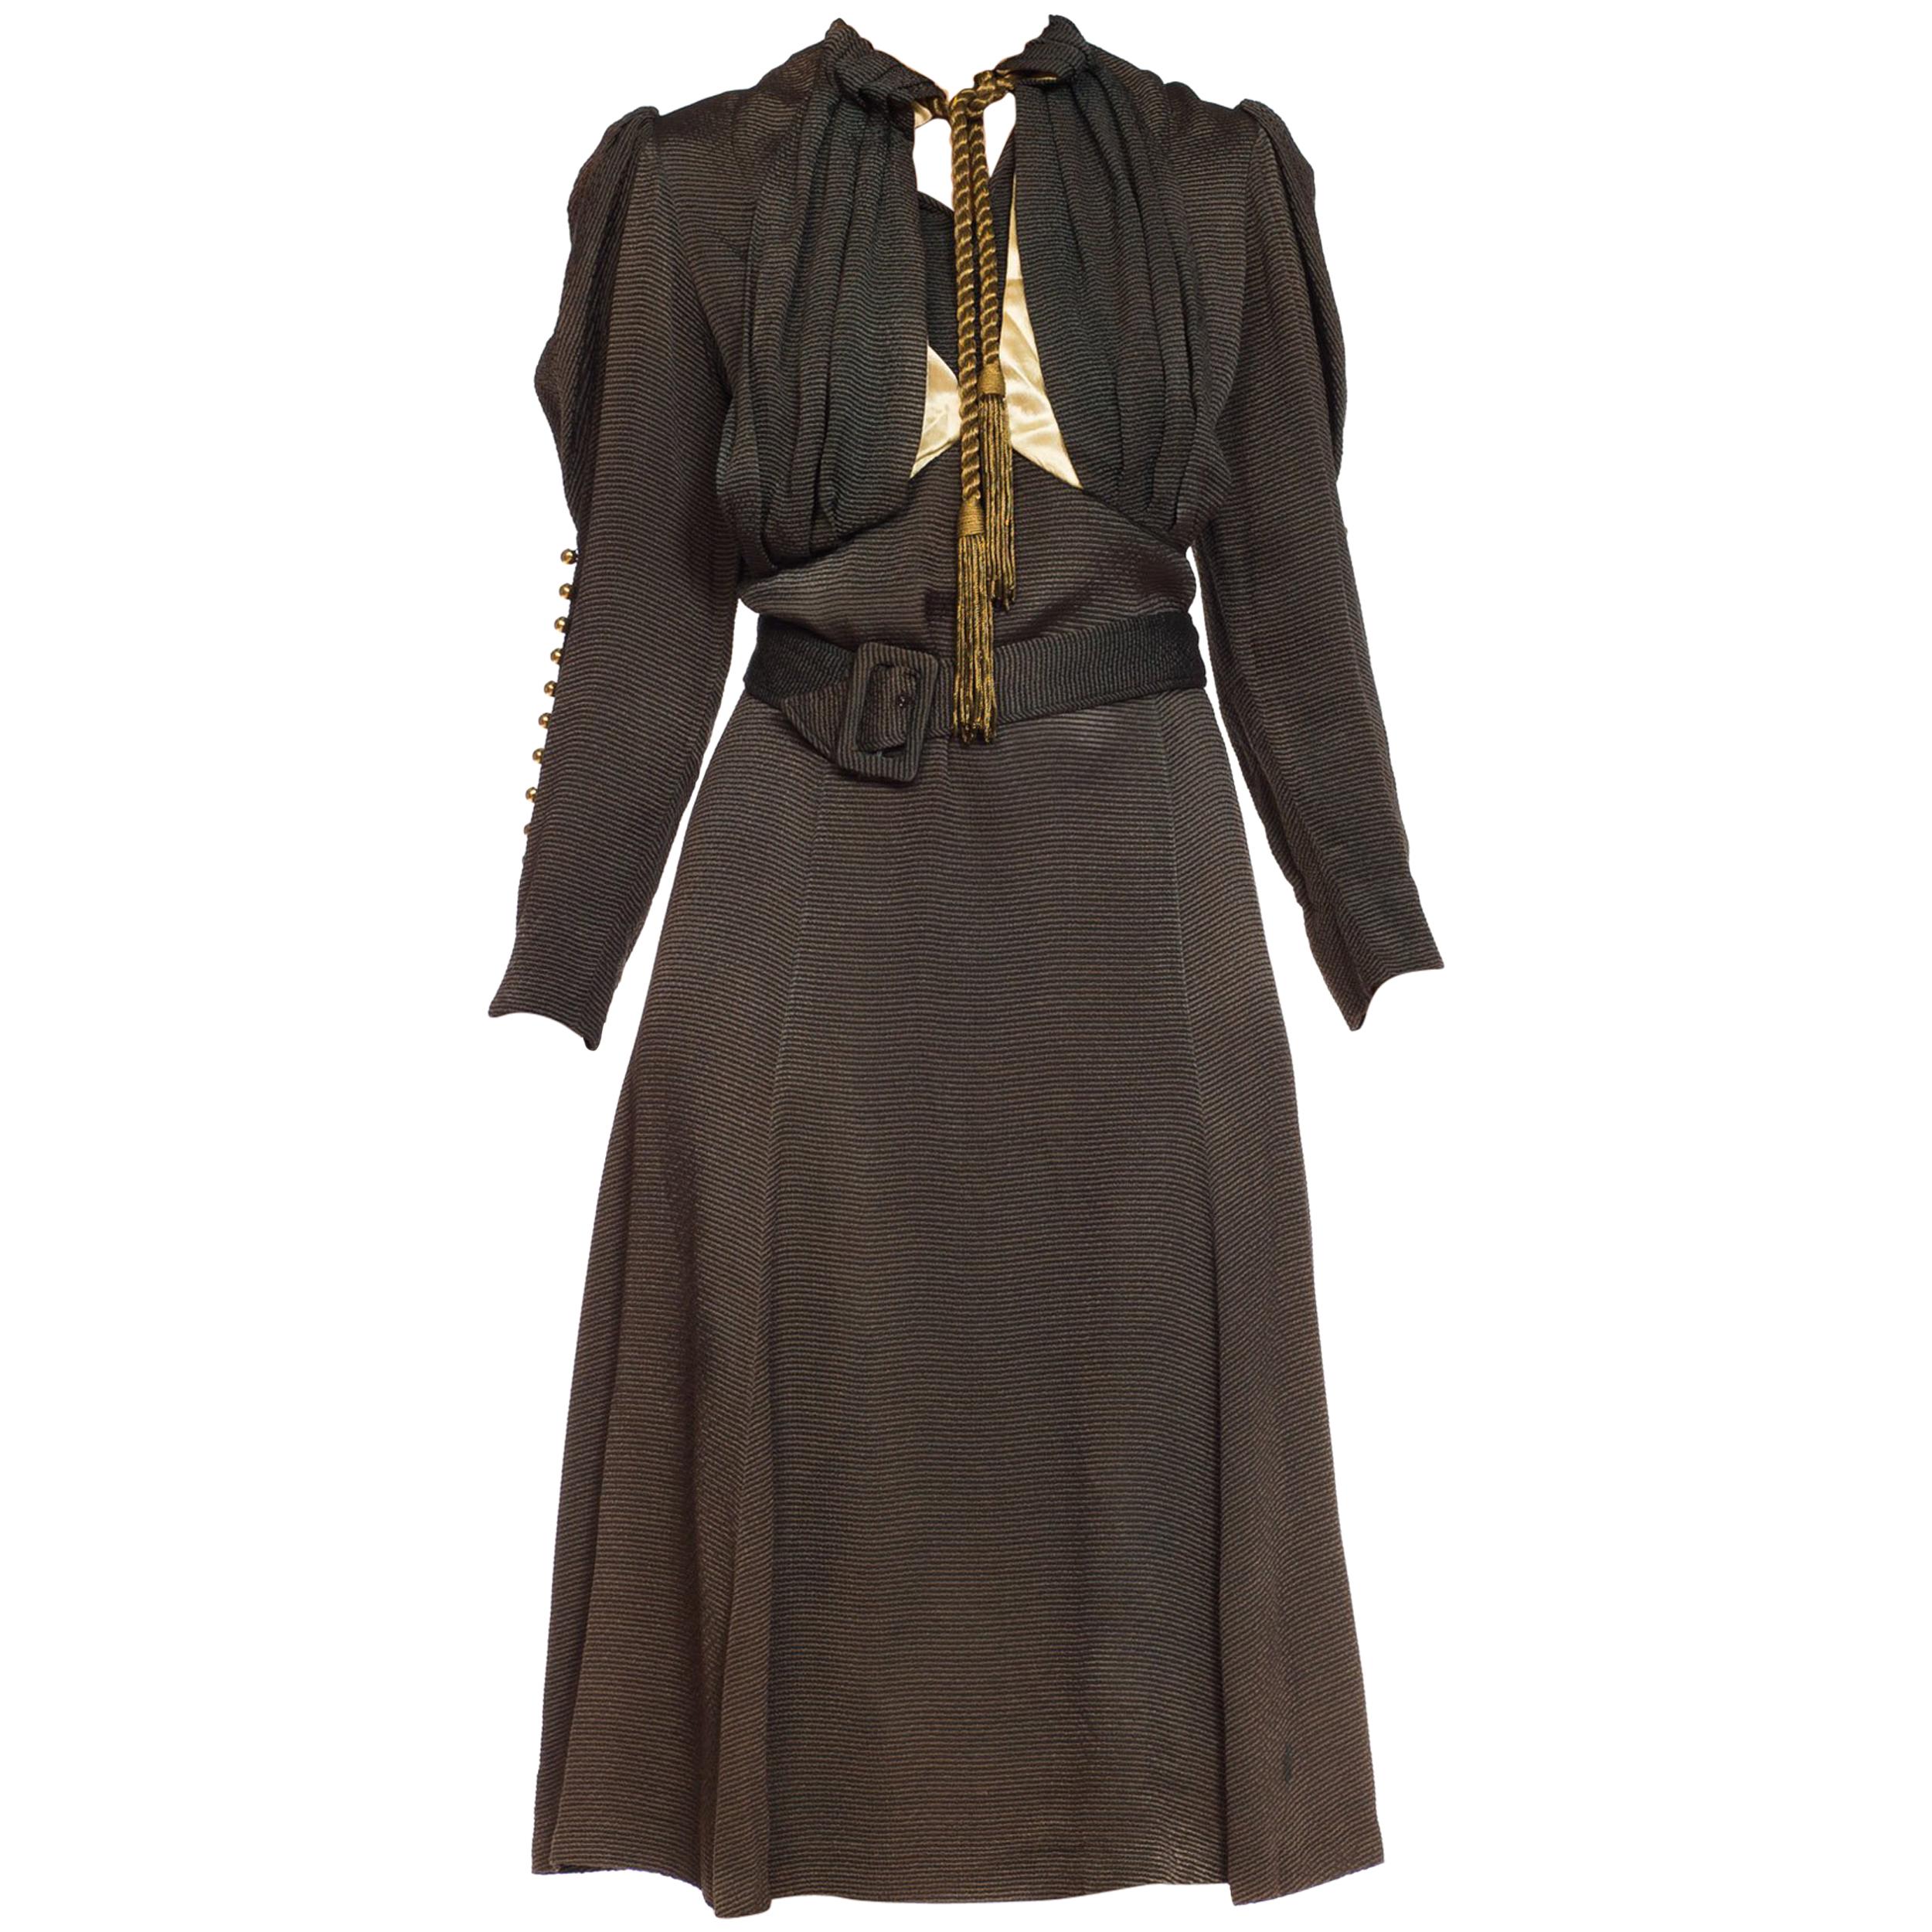 1930s Olive Green Textured Mutton Sleeve Dress